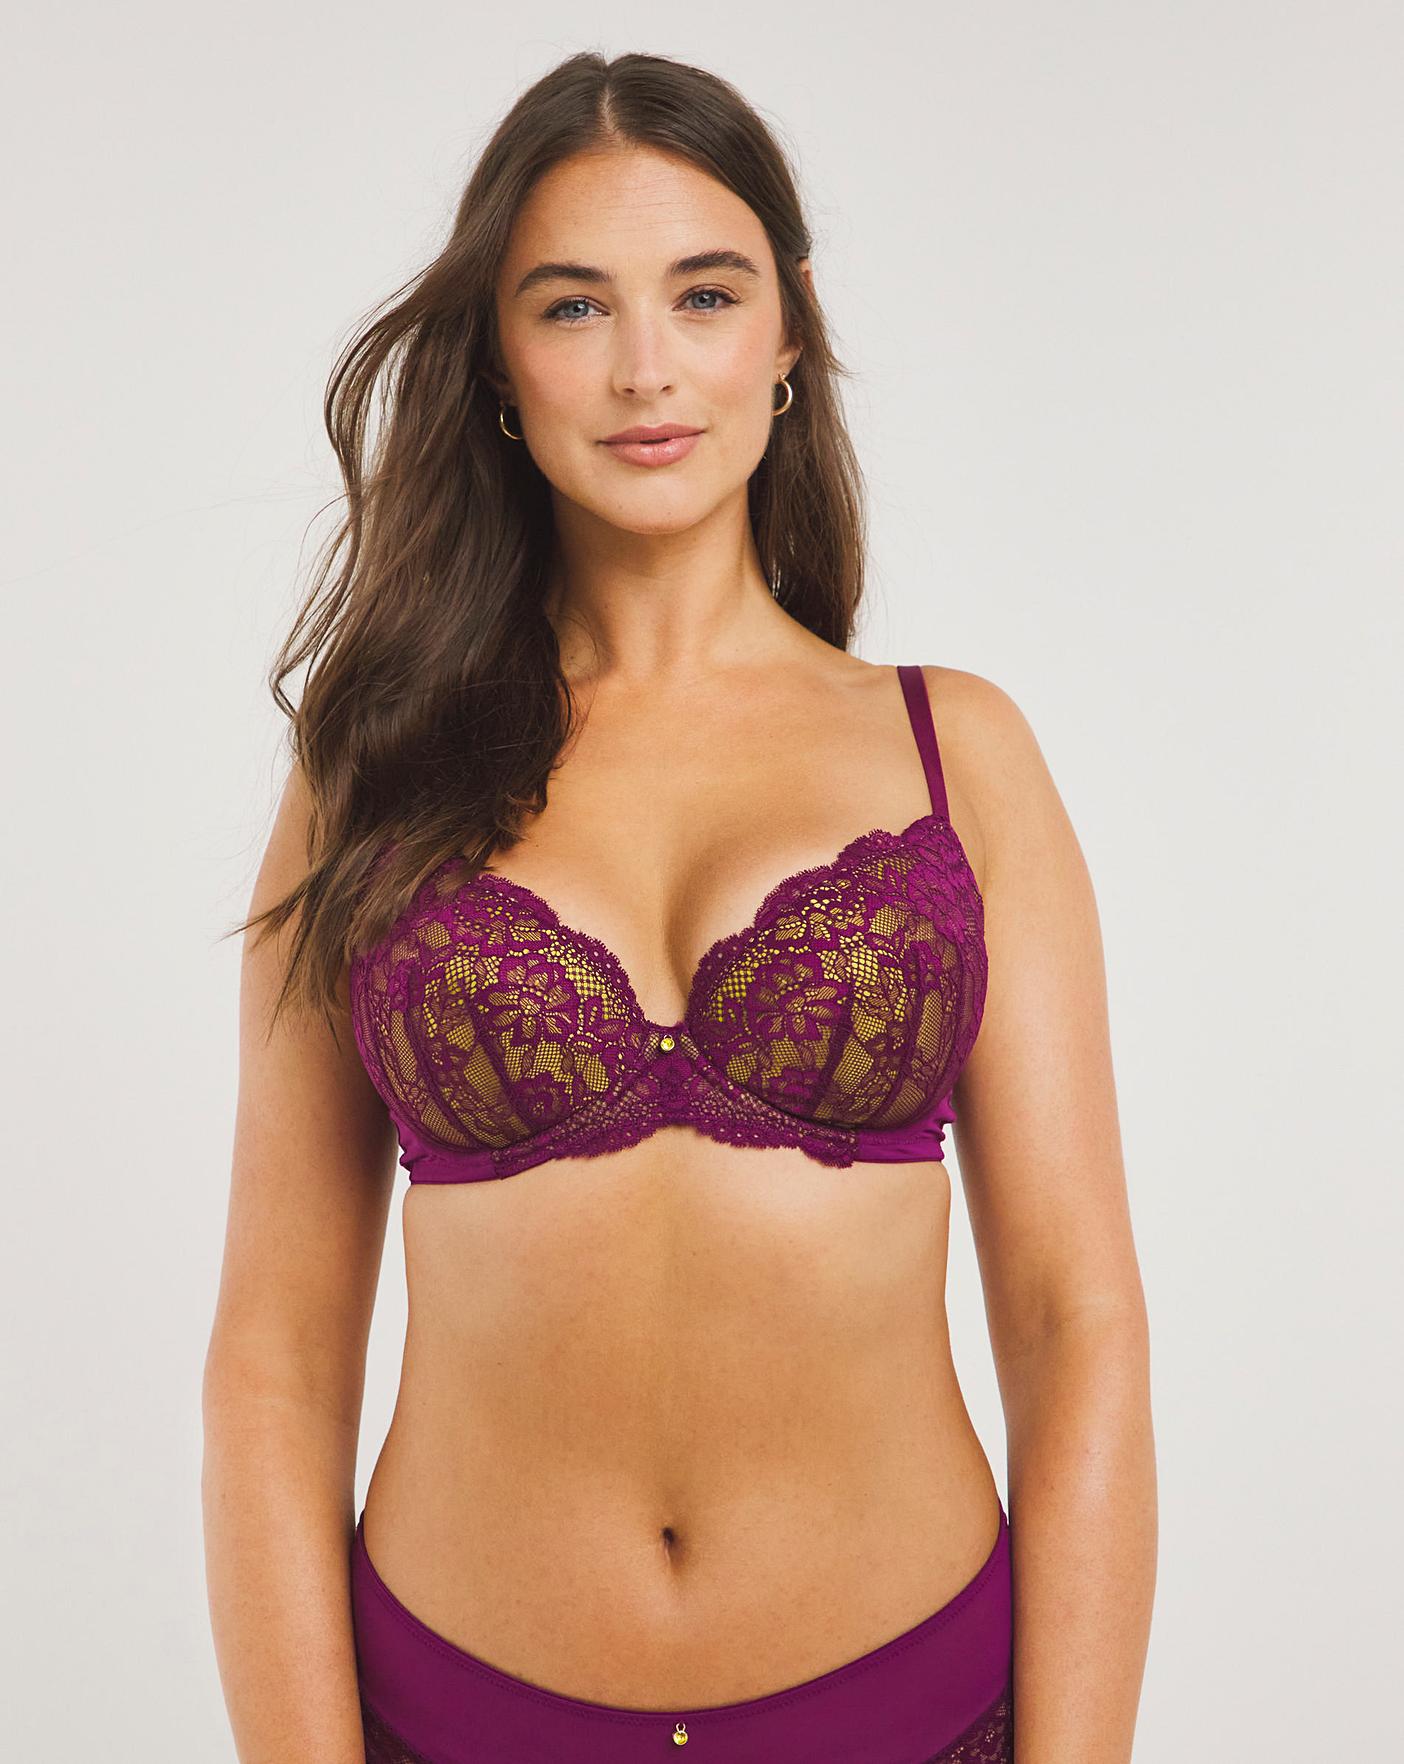 Sexy Lace Underwired Padded Plunge Bra by Ann Summers